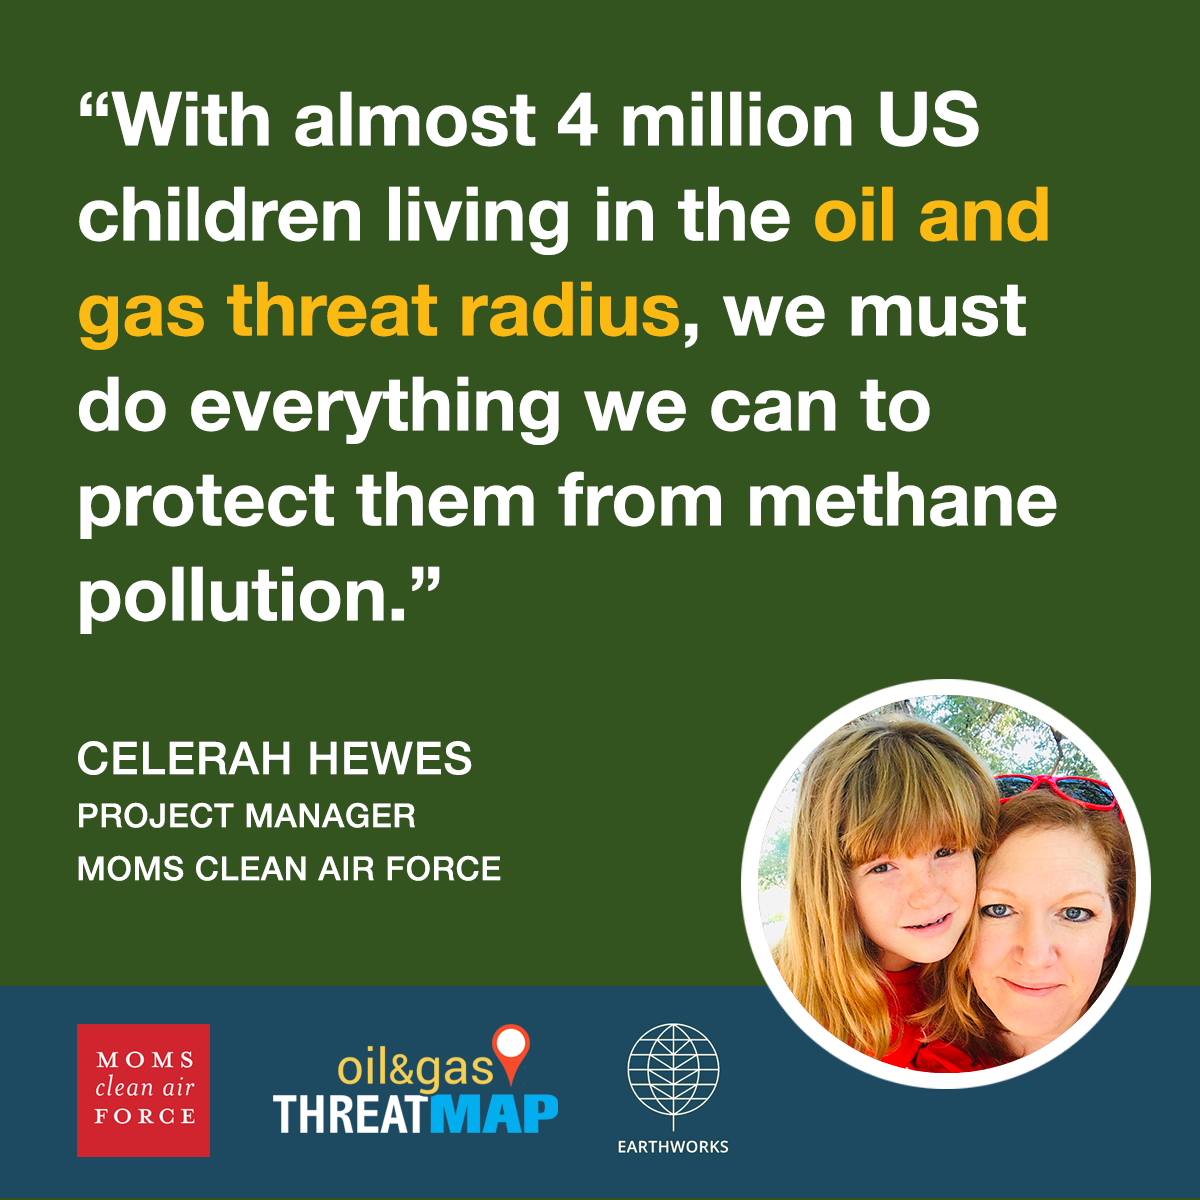 oil & gas threat map quote from Moms Clean Air Force member Celerah Hewes